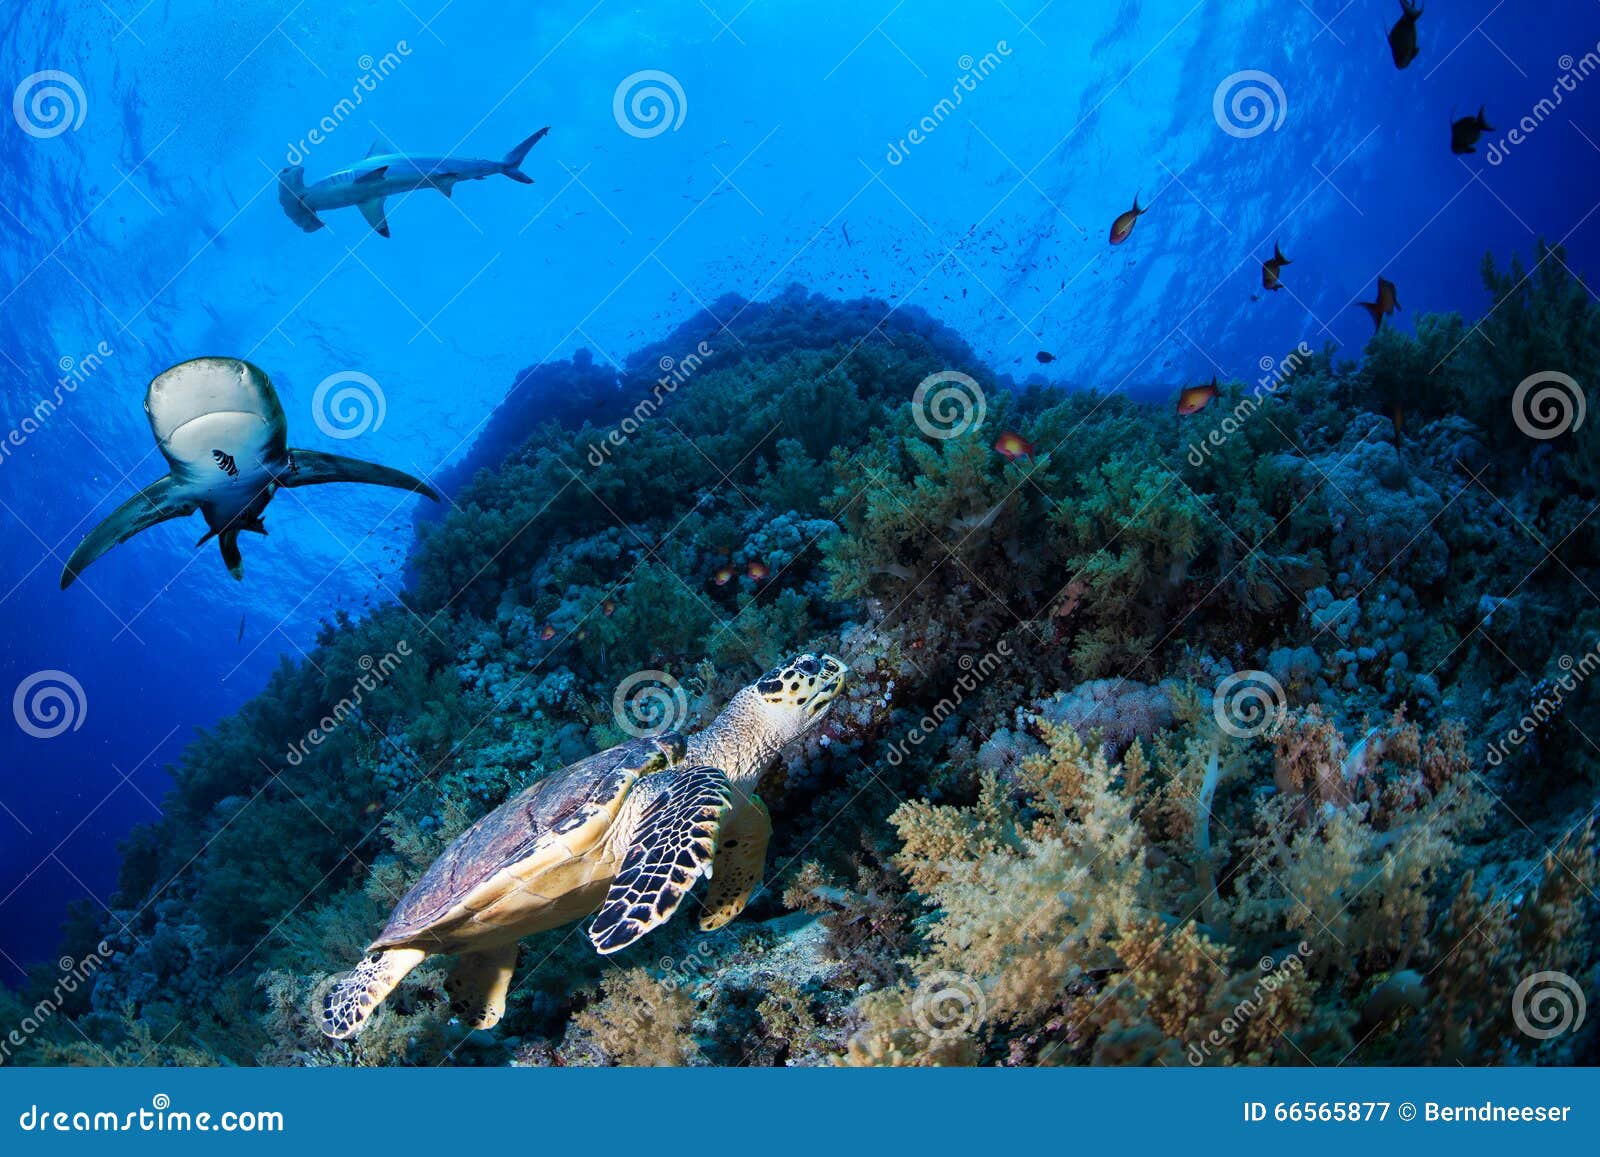 green sea turtle in a reef with sharks